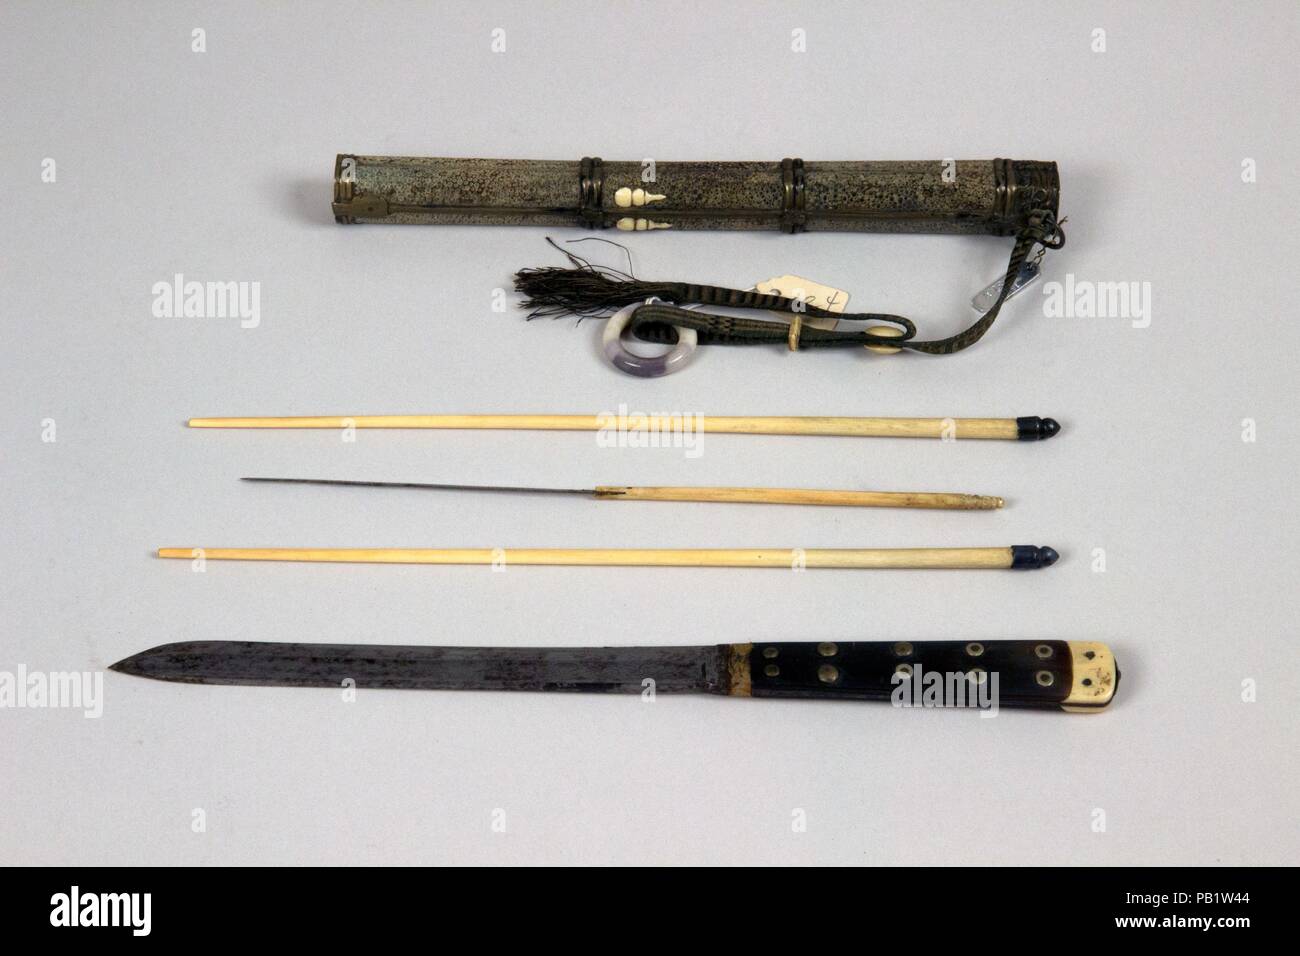 Knife with Sheath, Chopsticks, Pickle Spear and Toothpicks. Culture: Chinese. Dimensions: Knife (a); L. with sheath 13 3/16 in. (33.5 cm); L. without sheath 11 1/4 in. (28.6 cm); W. 3/4 in. (1.9 cm); Wt. 3.1 oz. (87.9 g); sheath (b); Wt. 1.7 oz. (48.2 g); chopsticks (c, d); L. 10 5/16 in. (26.2 cm); W. 1/4 in. (0.6 cm); Wt. 0.4 oz. (11.3 g); pickle spear (e); L. 8 7/8 in. (22.5 cm); W. 3/16 in. (0.5 cm); Wt. 0.2 oz. (5.7 g); earspoon (f); L. 2 13/16 in. (7.1 cm); pick (g); L. 2 13/16 in. (7.1 cm); pick (h); L. 2 15/16 in. (7.5 cm). Date: 18th-19th century. Museum: Metropolitan Museum of Art, N Stock Photo